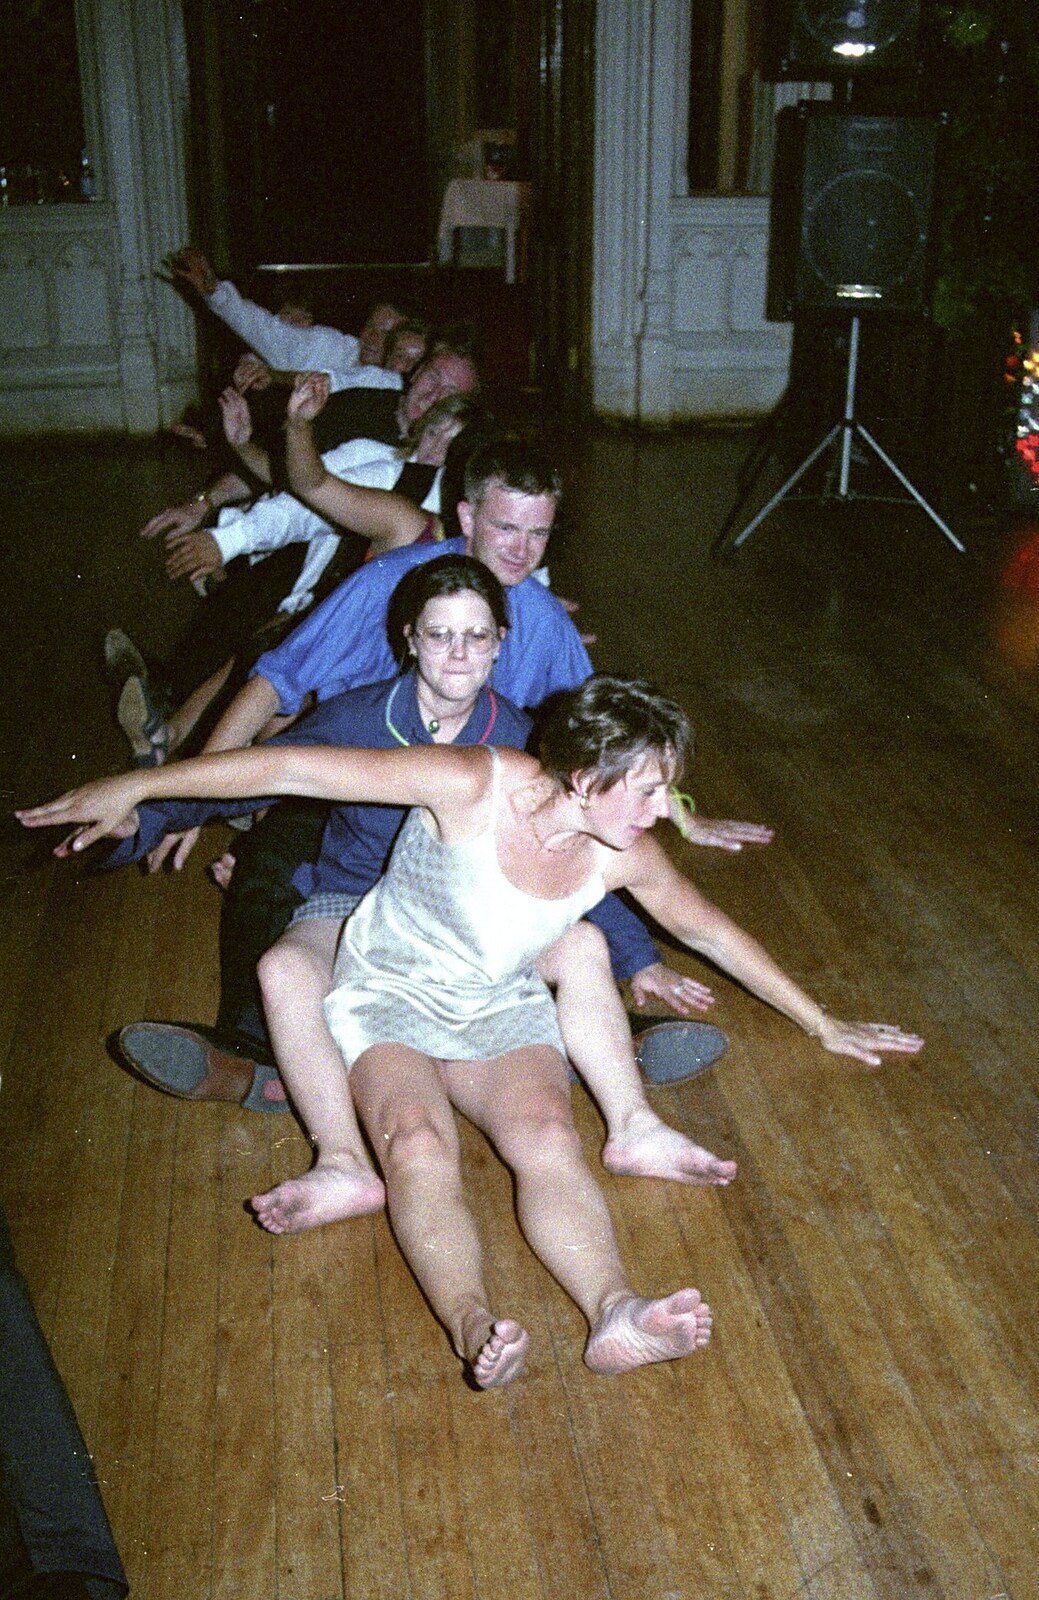 Hamish and Jane's Wedding, Canford School, Wimborne, Dorset - 5th August 1998: That bizarre wedding-reception ritual that is Hues Corporation's 'Oops upside your head'